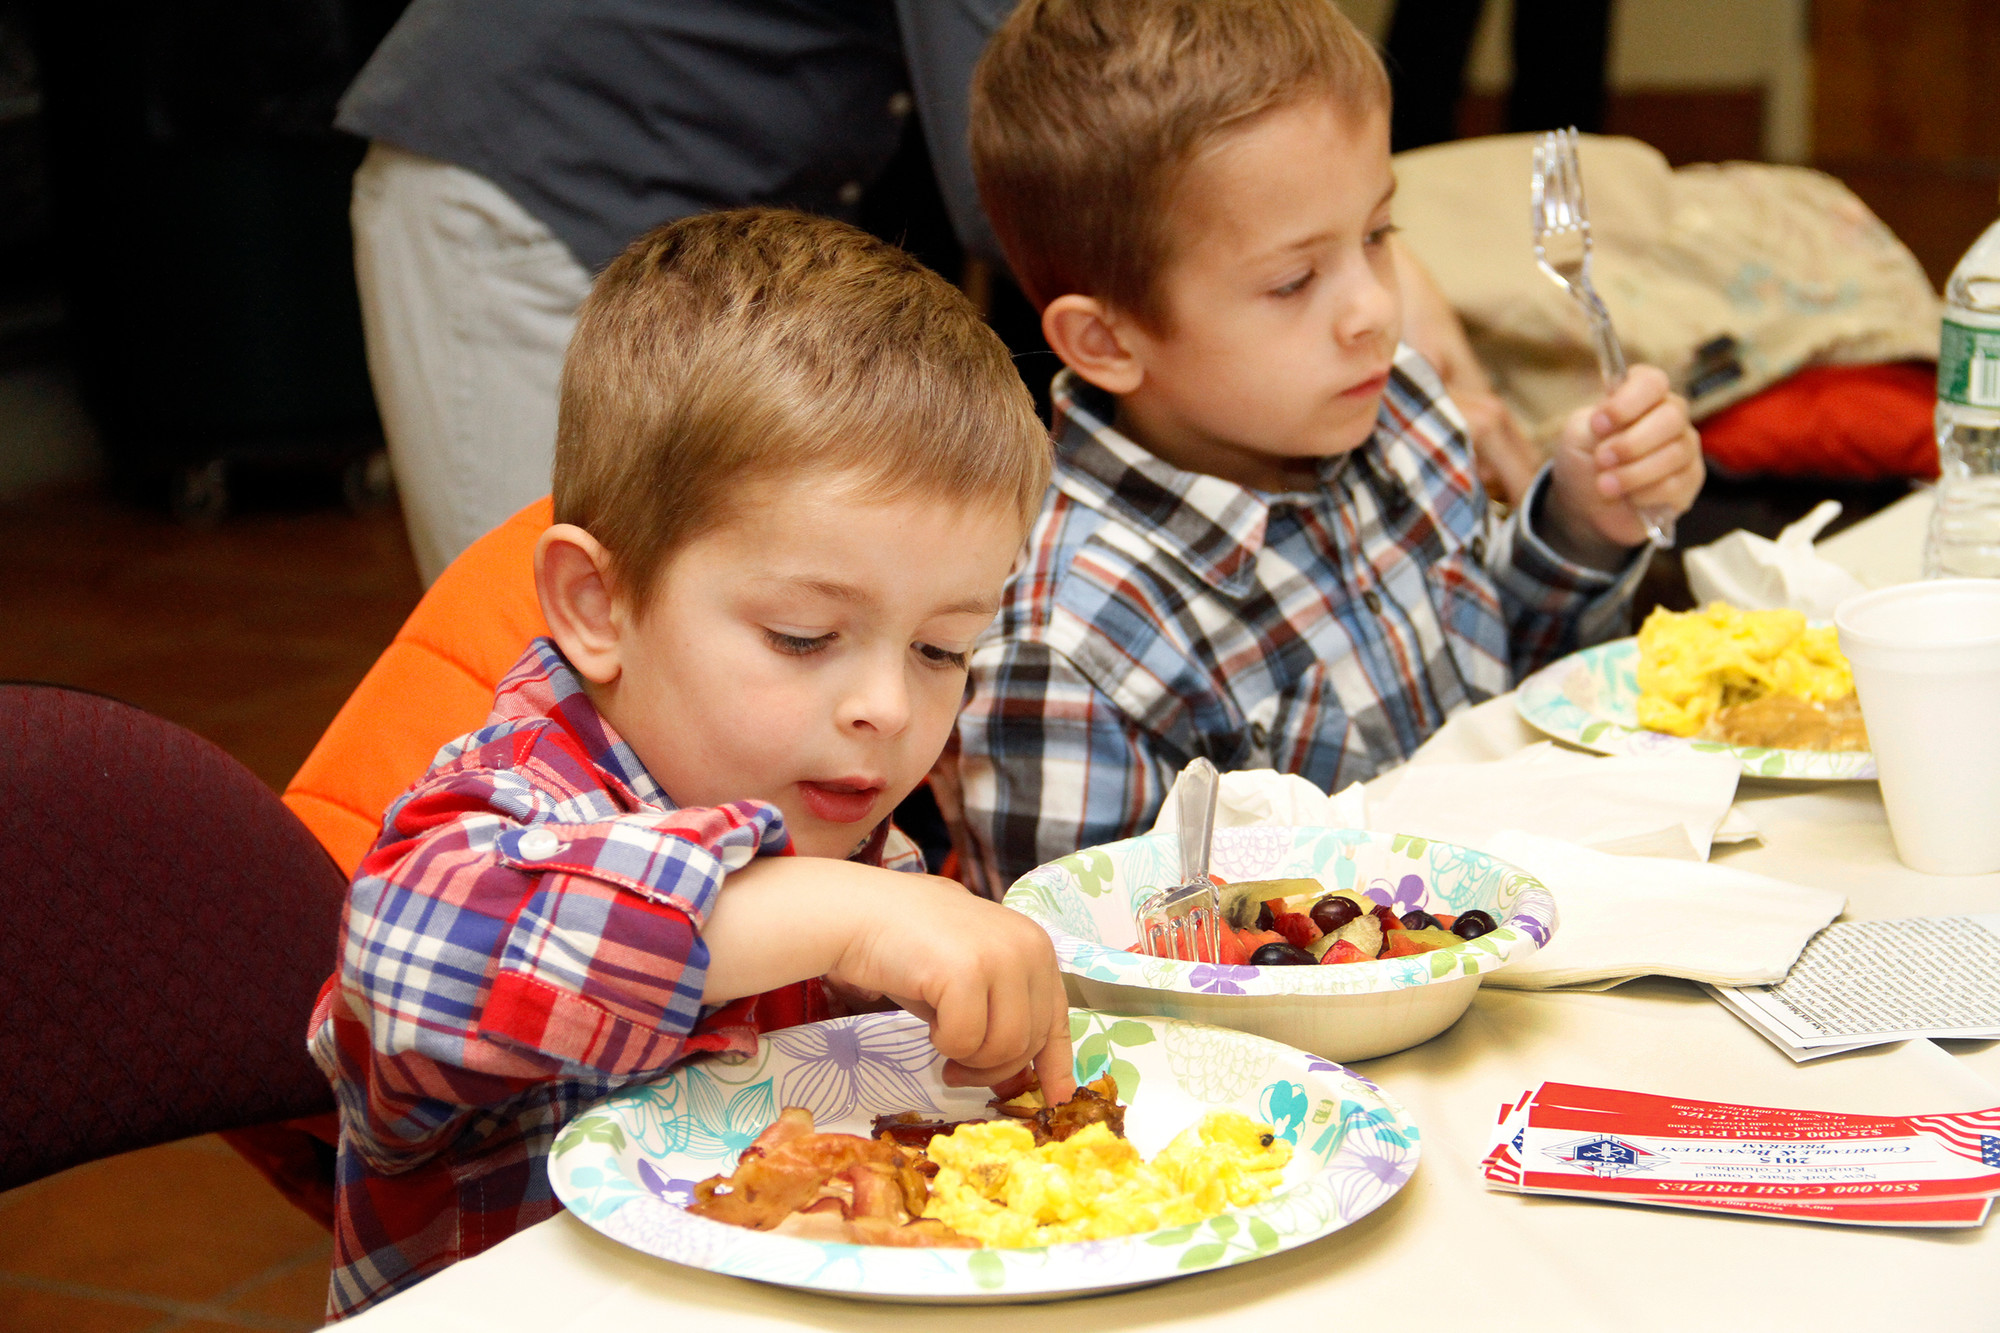 Lucca and Rocco Cerullo, 5 and 7, enjoyed their meal.